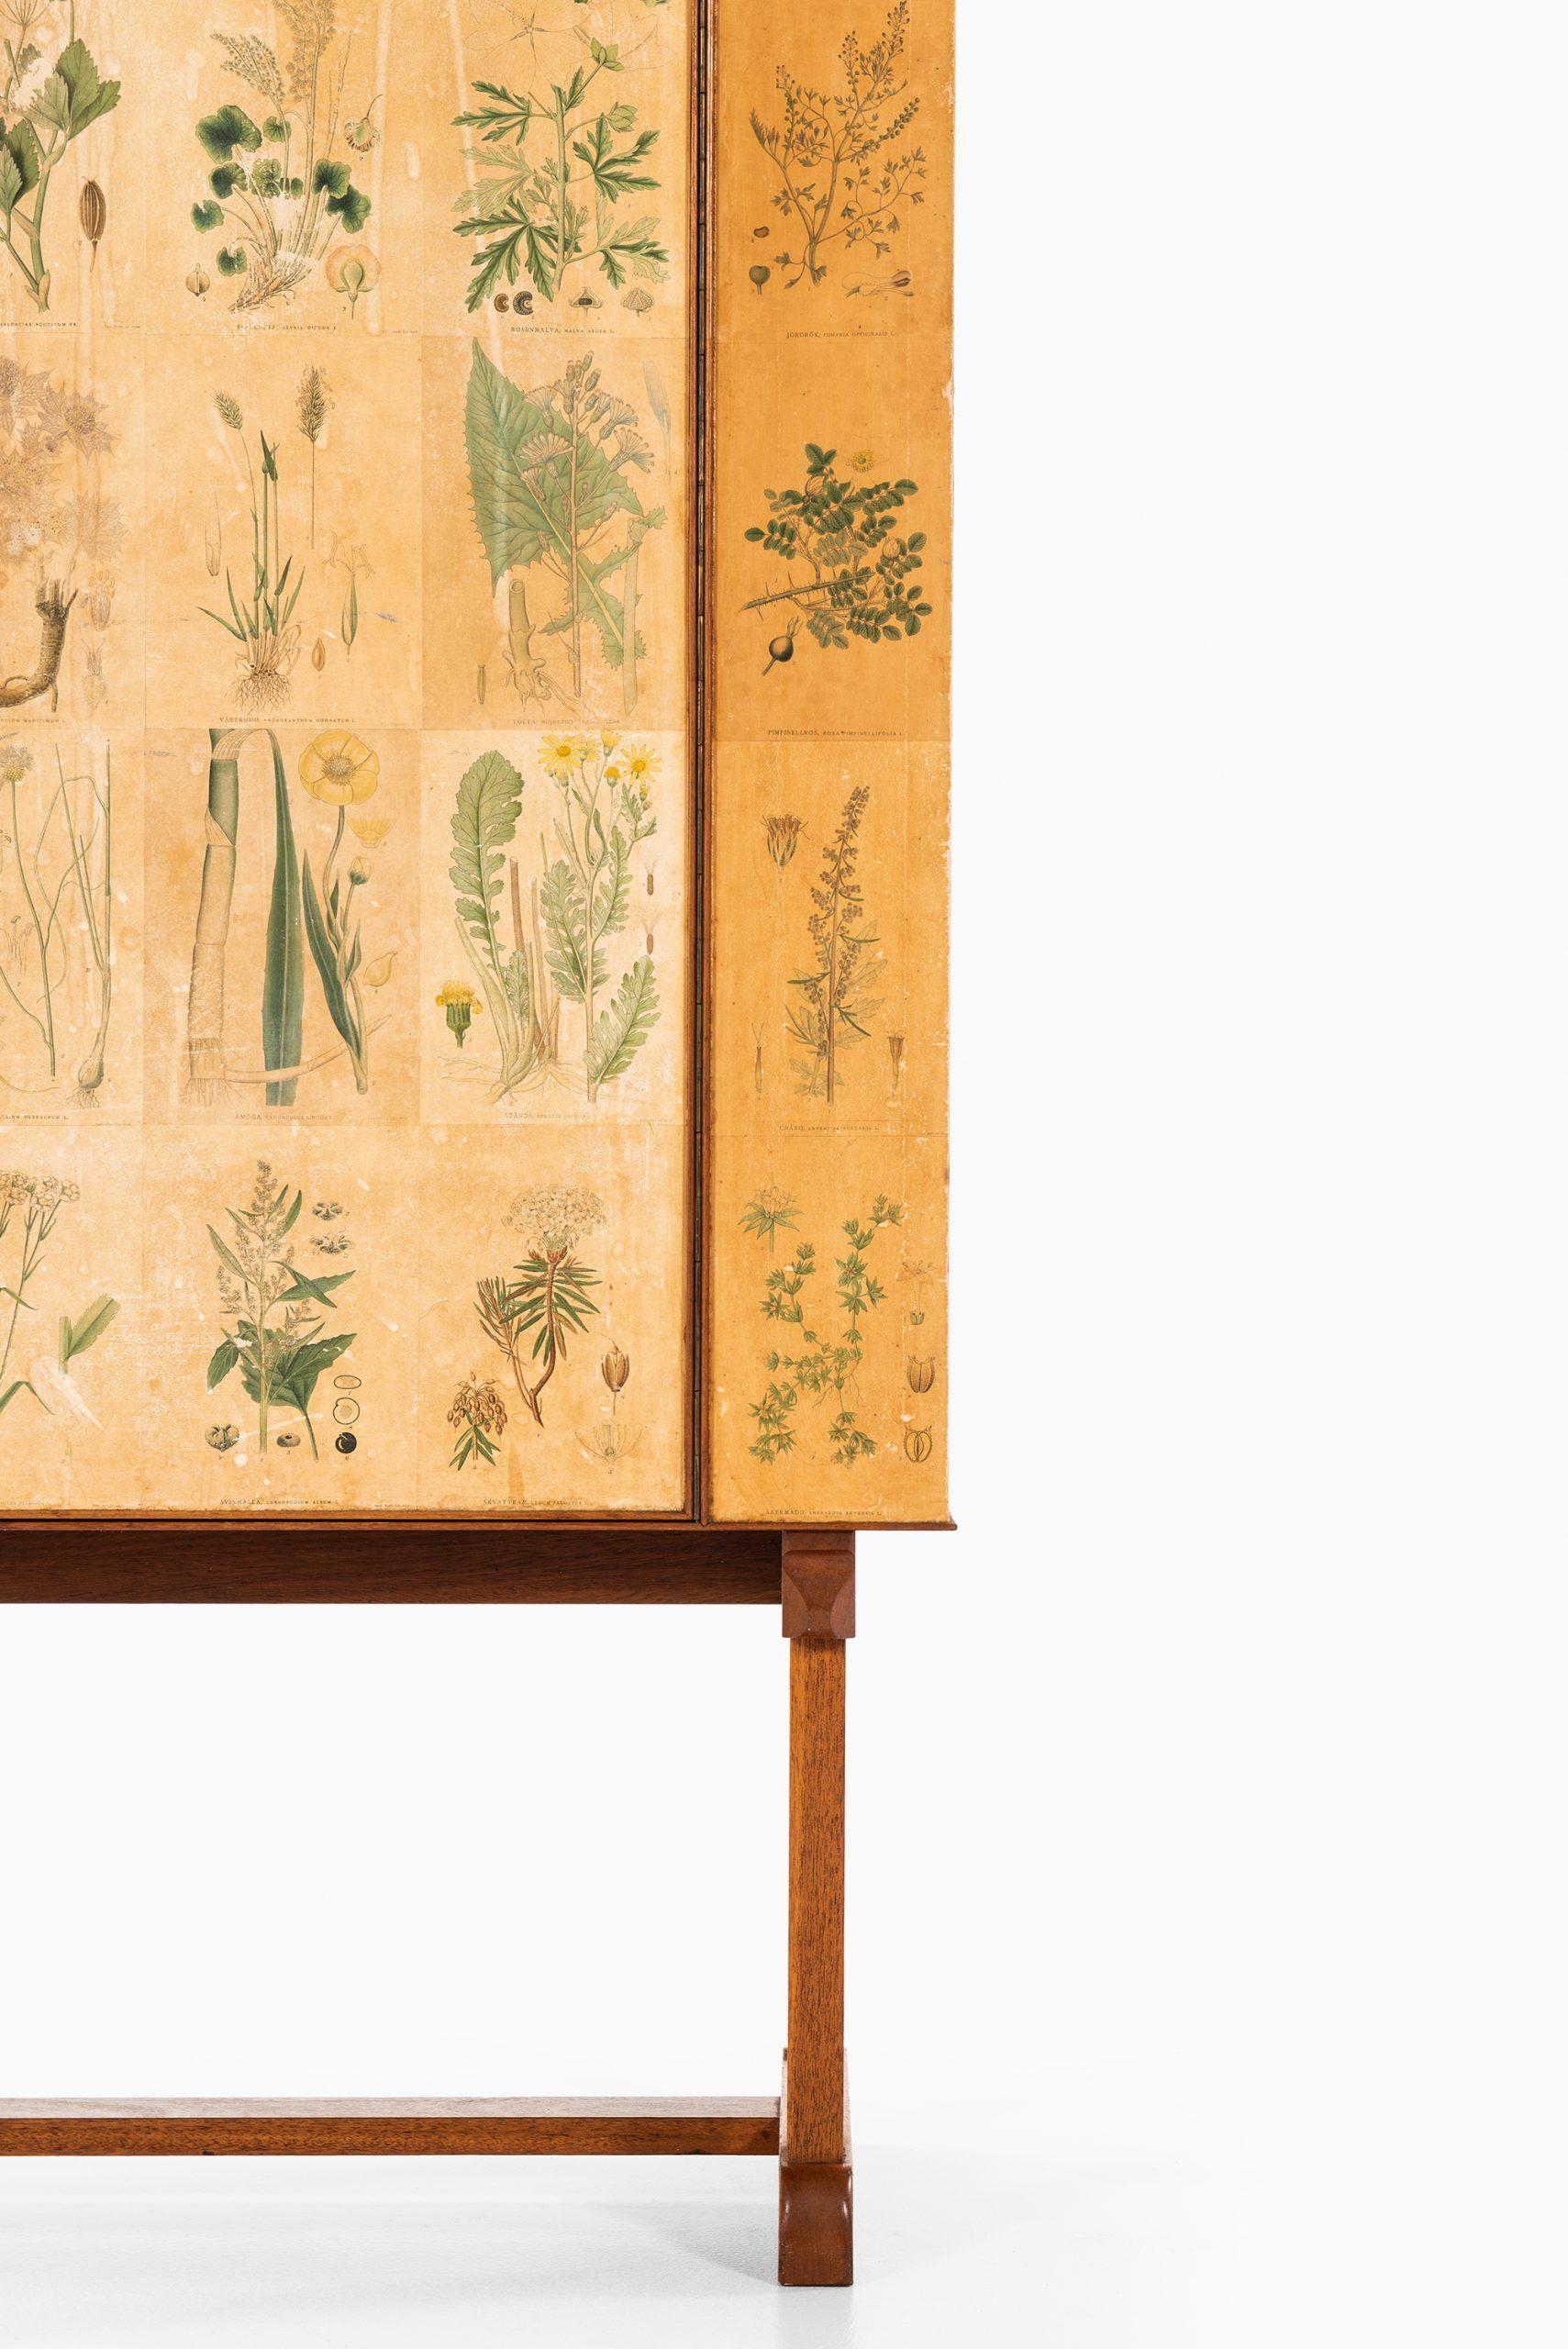 Very rare and early 1st edition of Flora / model 852 cabinet designed by Josef Frank. Produced by Svenskt Tenn in Sweden.